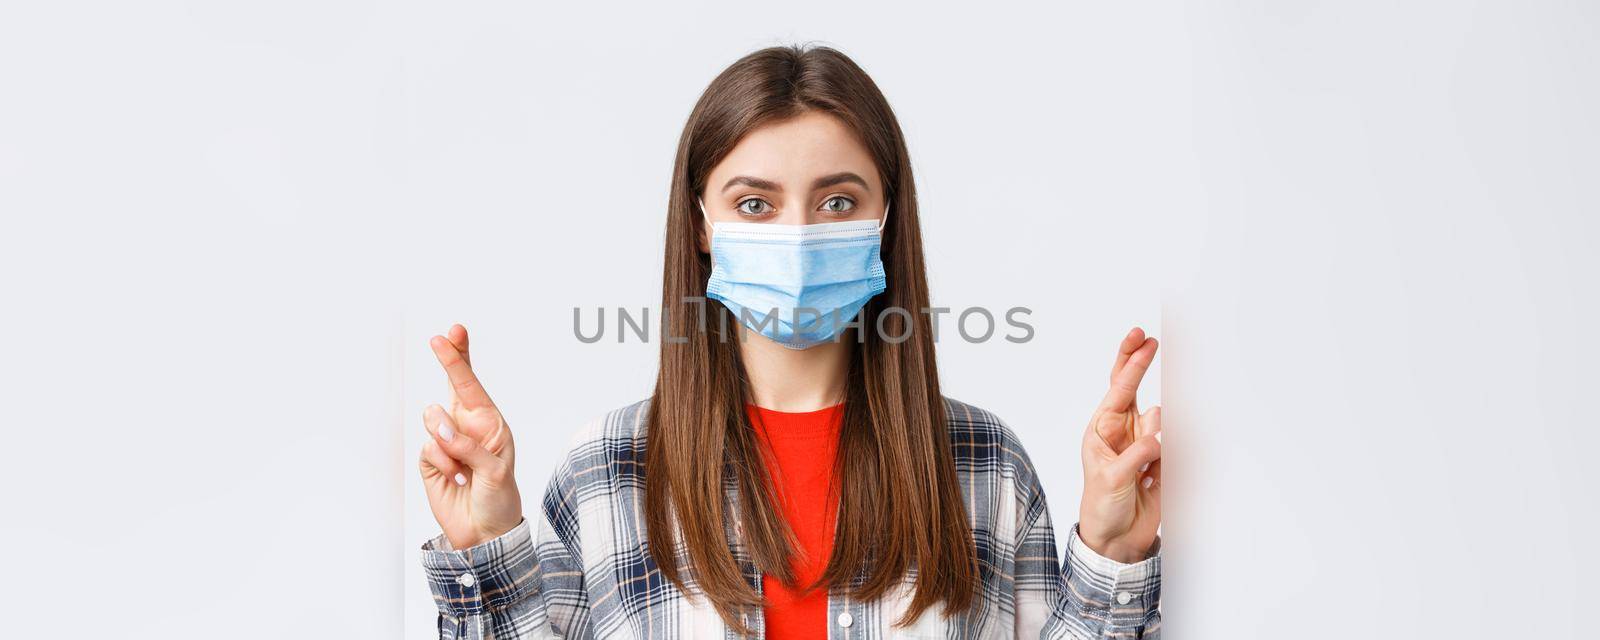 Coronavirus outbreak, leisure on quarantine, social distancing and emotions concept. Close-up of hopeful pretty woman in medical mask, cross fingers good luck, make wish or praying.